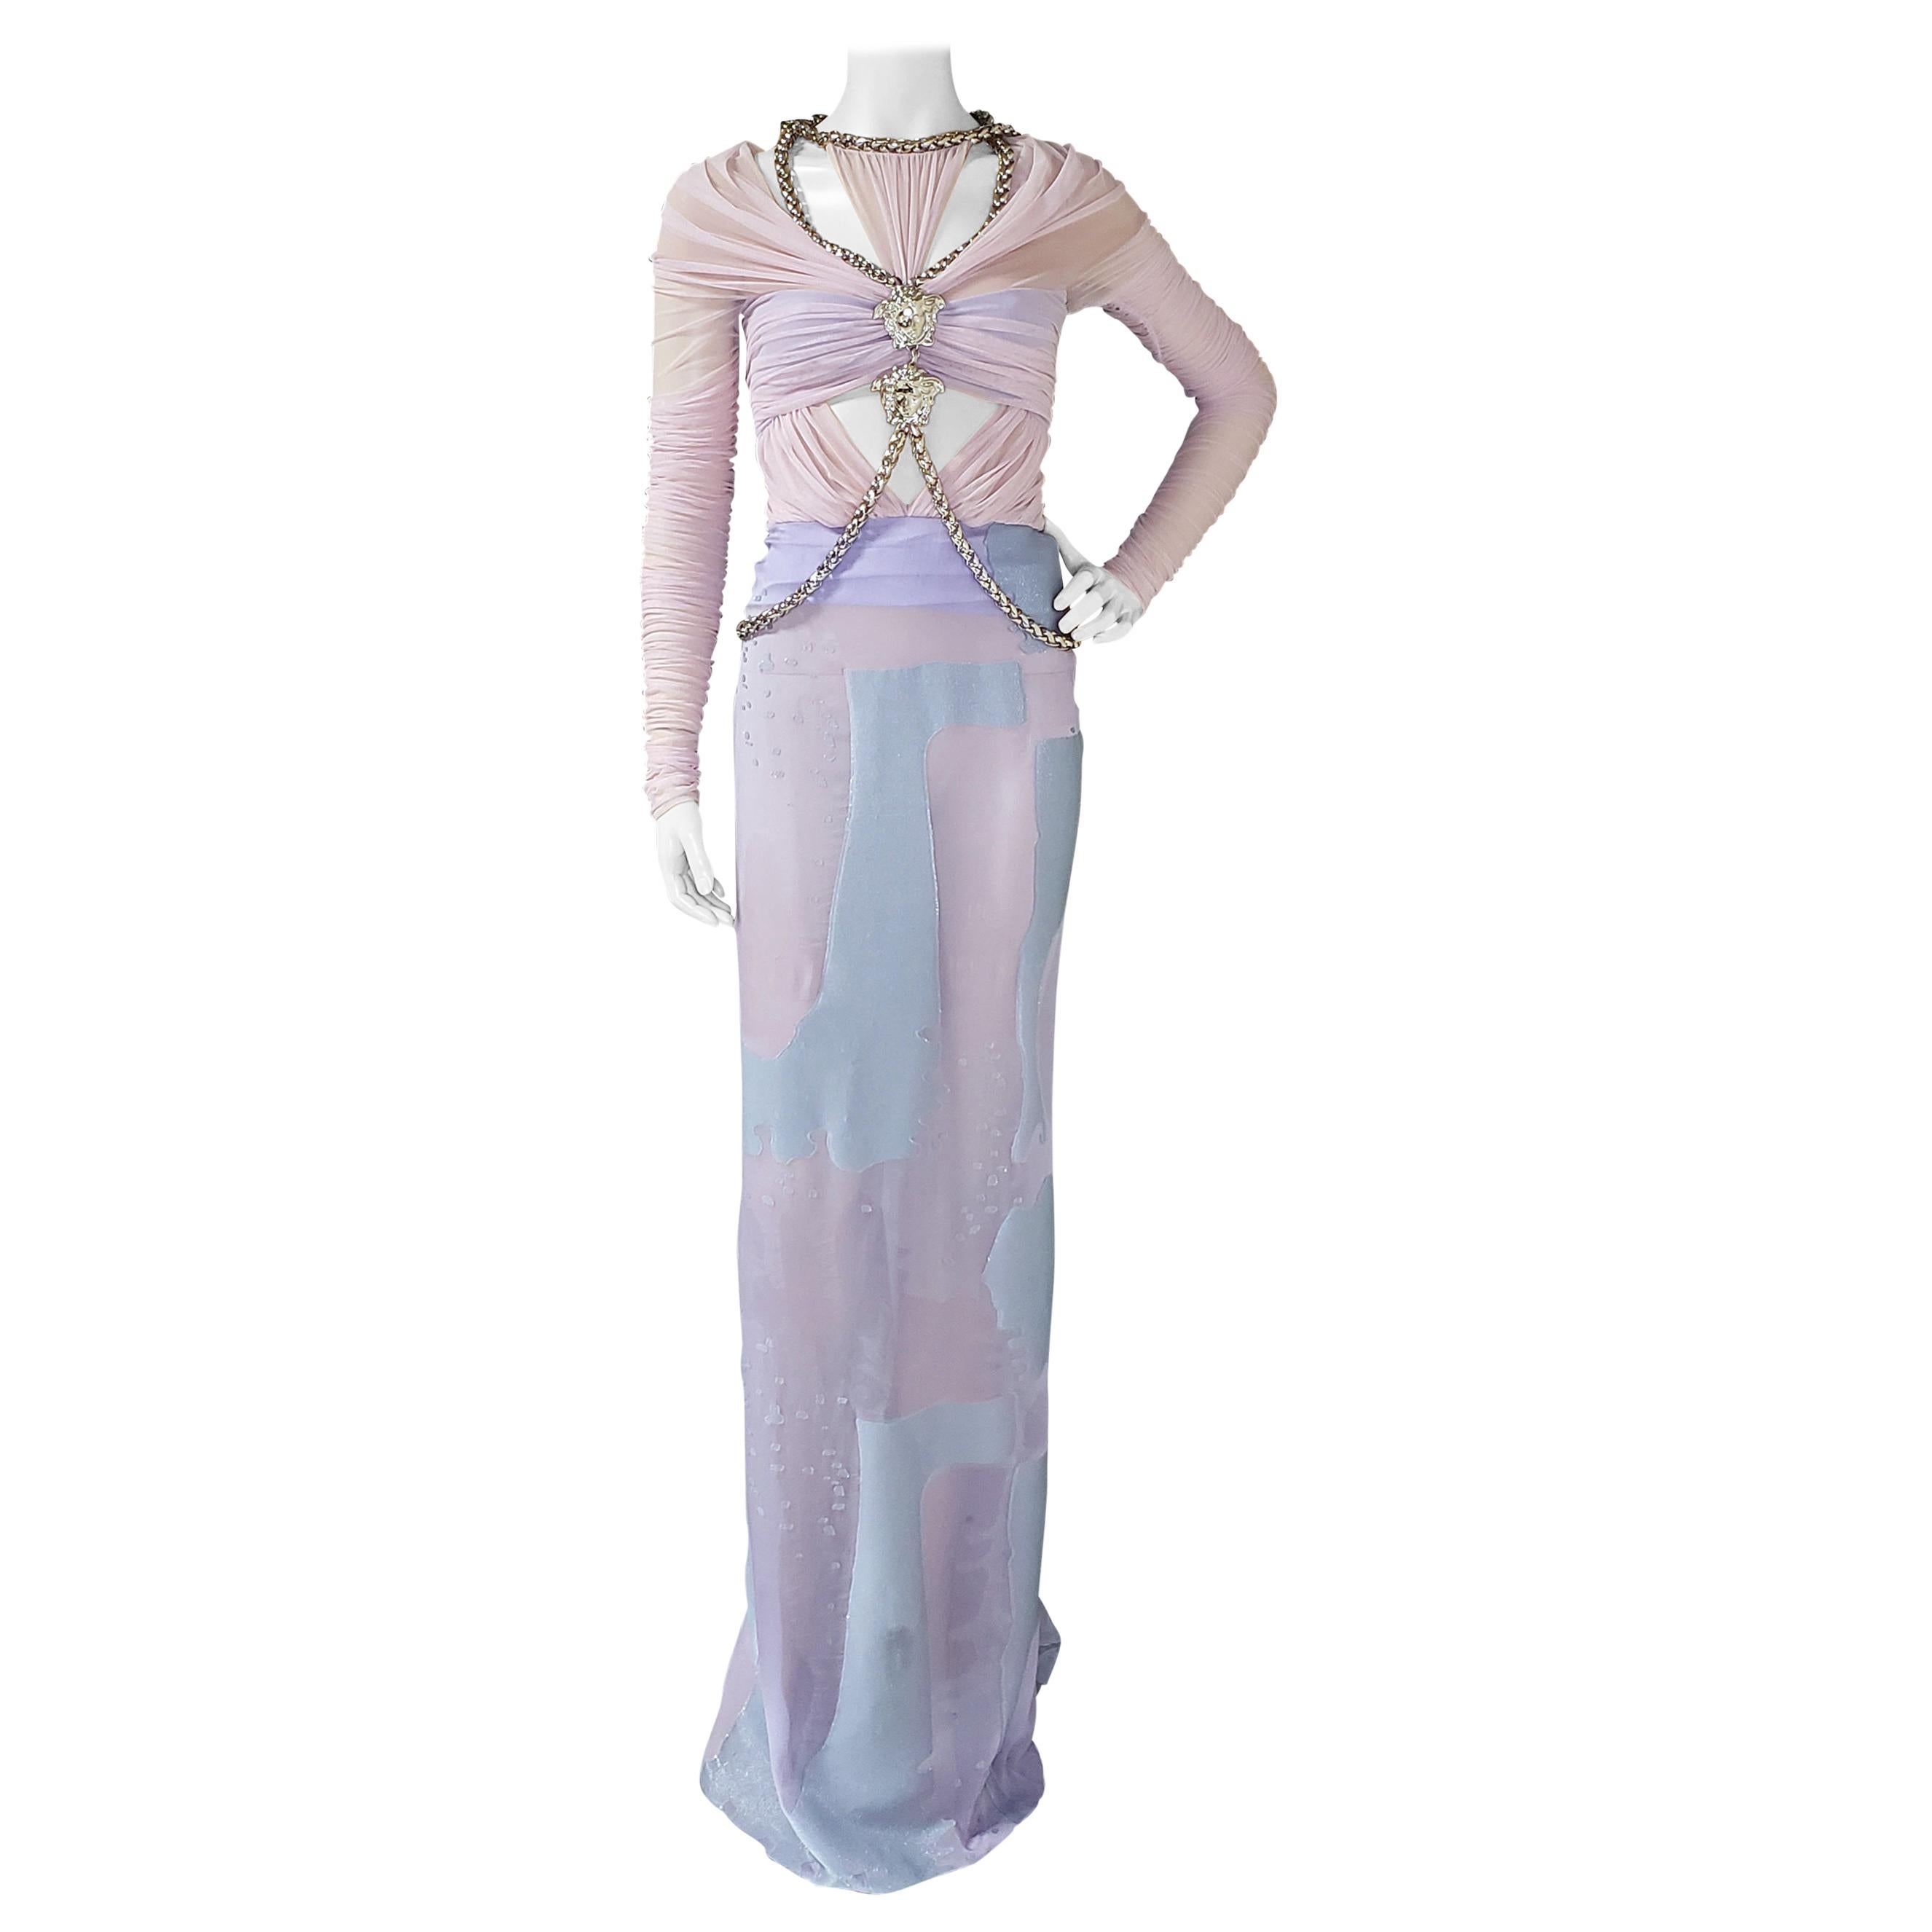 S/S 2014 look # 44 NEW VERSACE CHIFFON LILAC LONG DRESS GOWN 